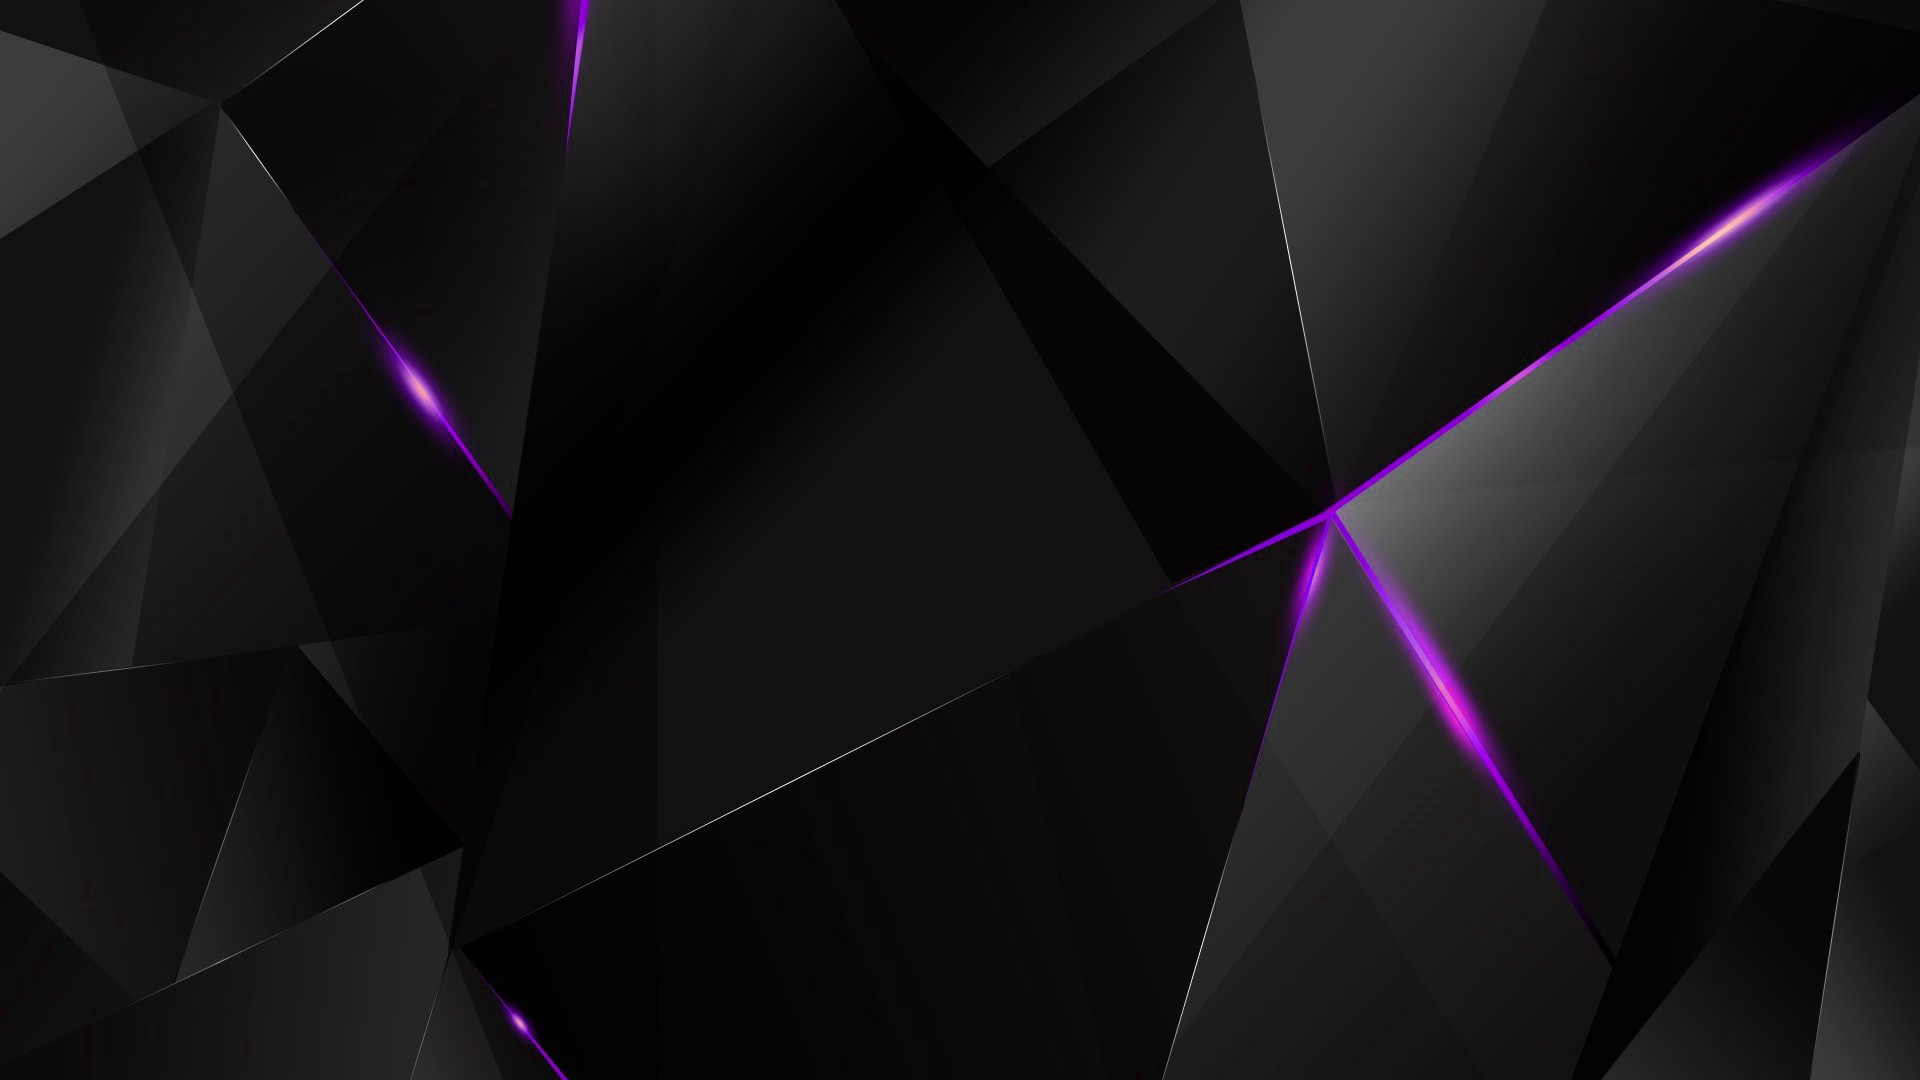 1920x1080 ... Wallpapers - Purple Abstract Polygons (Black BG) by kaminohunter